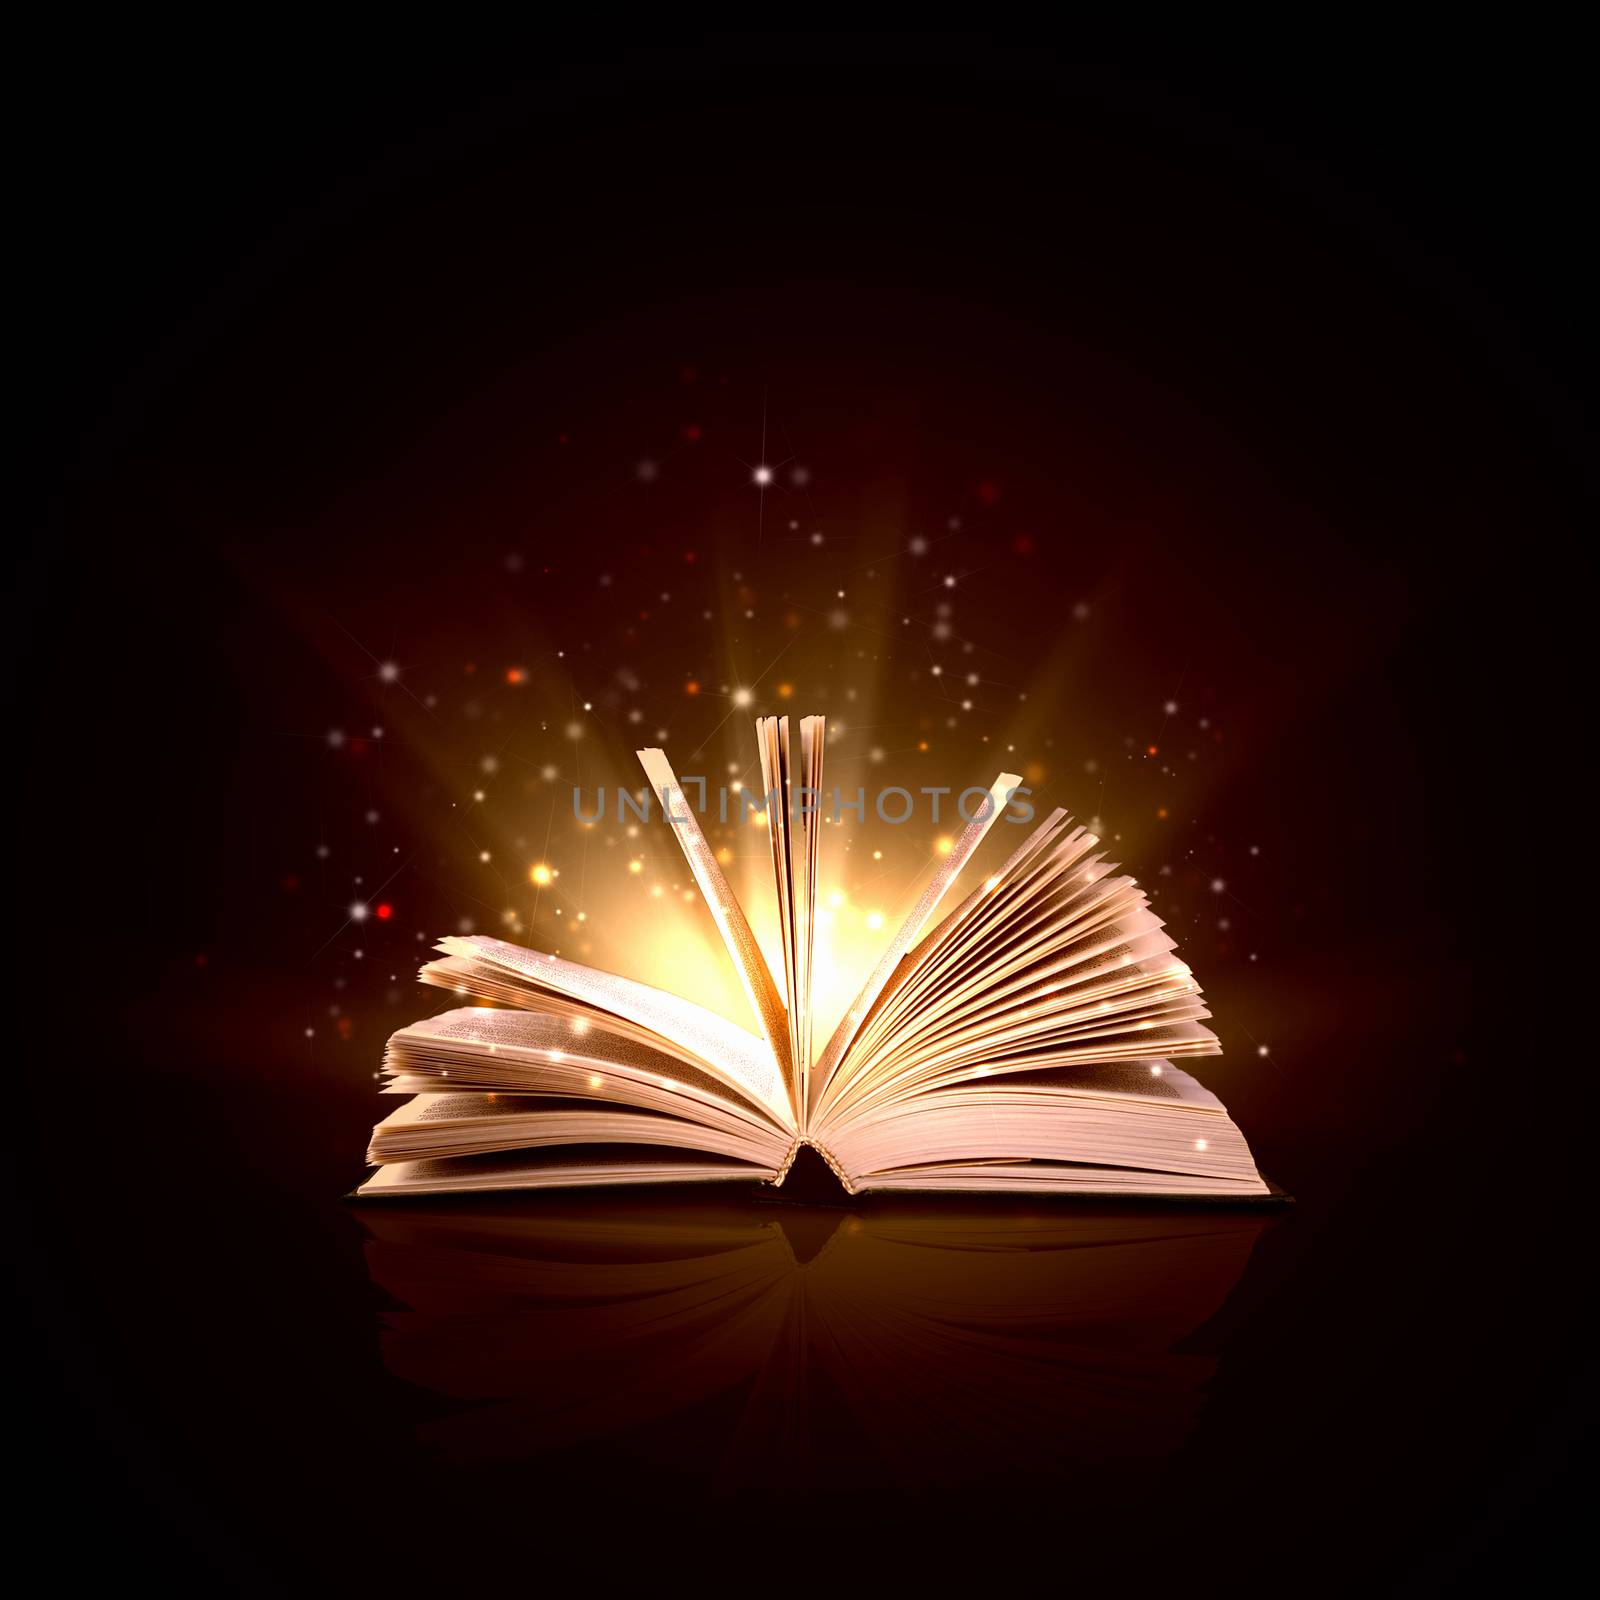 Image of opened magic book with magic lights